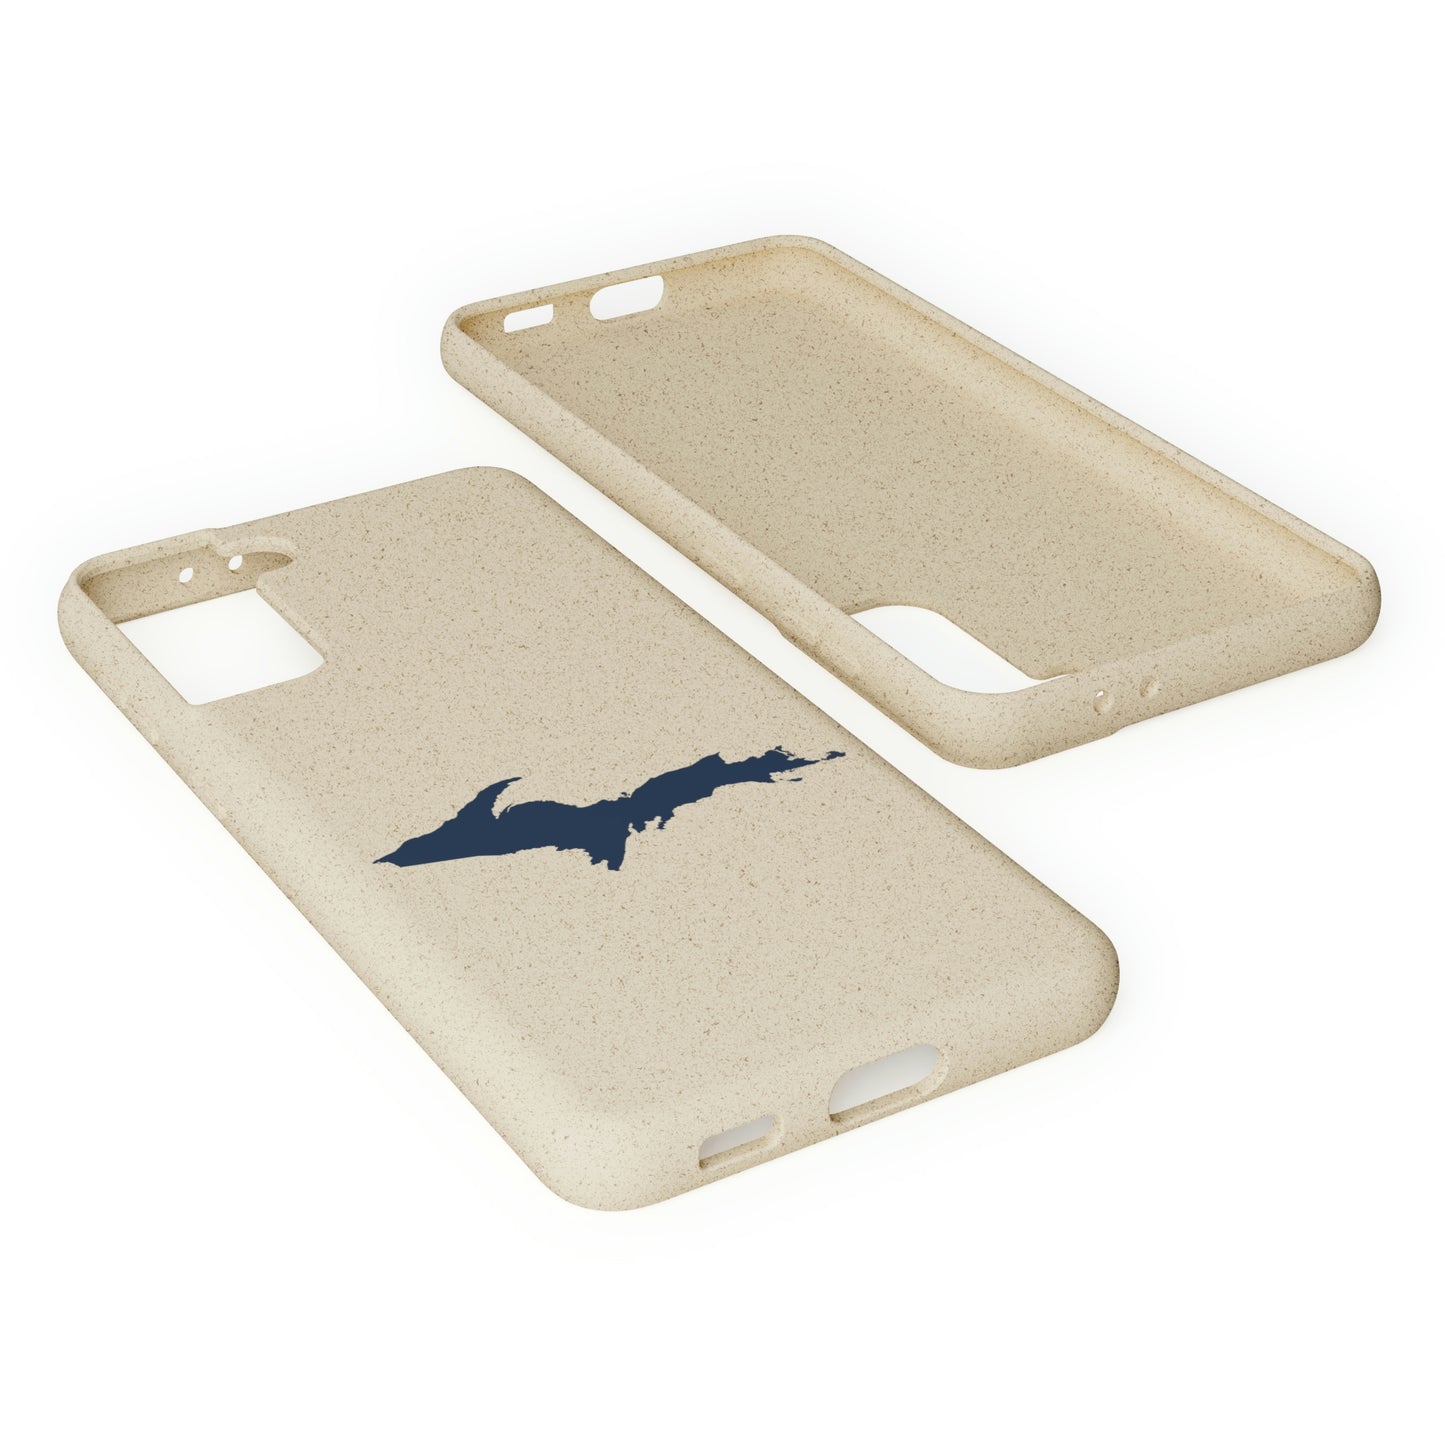 Michigan Upper Peninsula Biodegradable Phone Cases (w/ Navy UP Outline) | Samsung Android